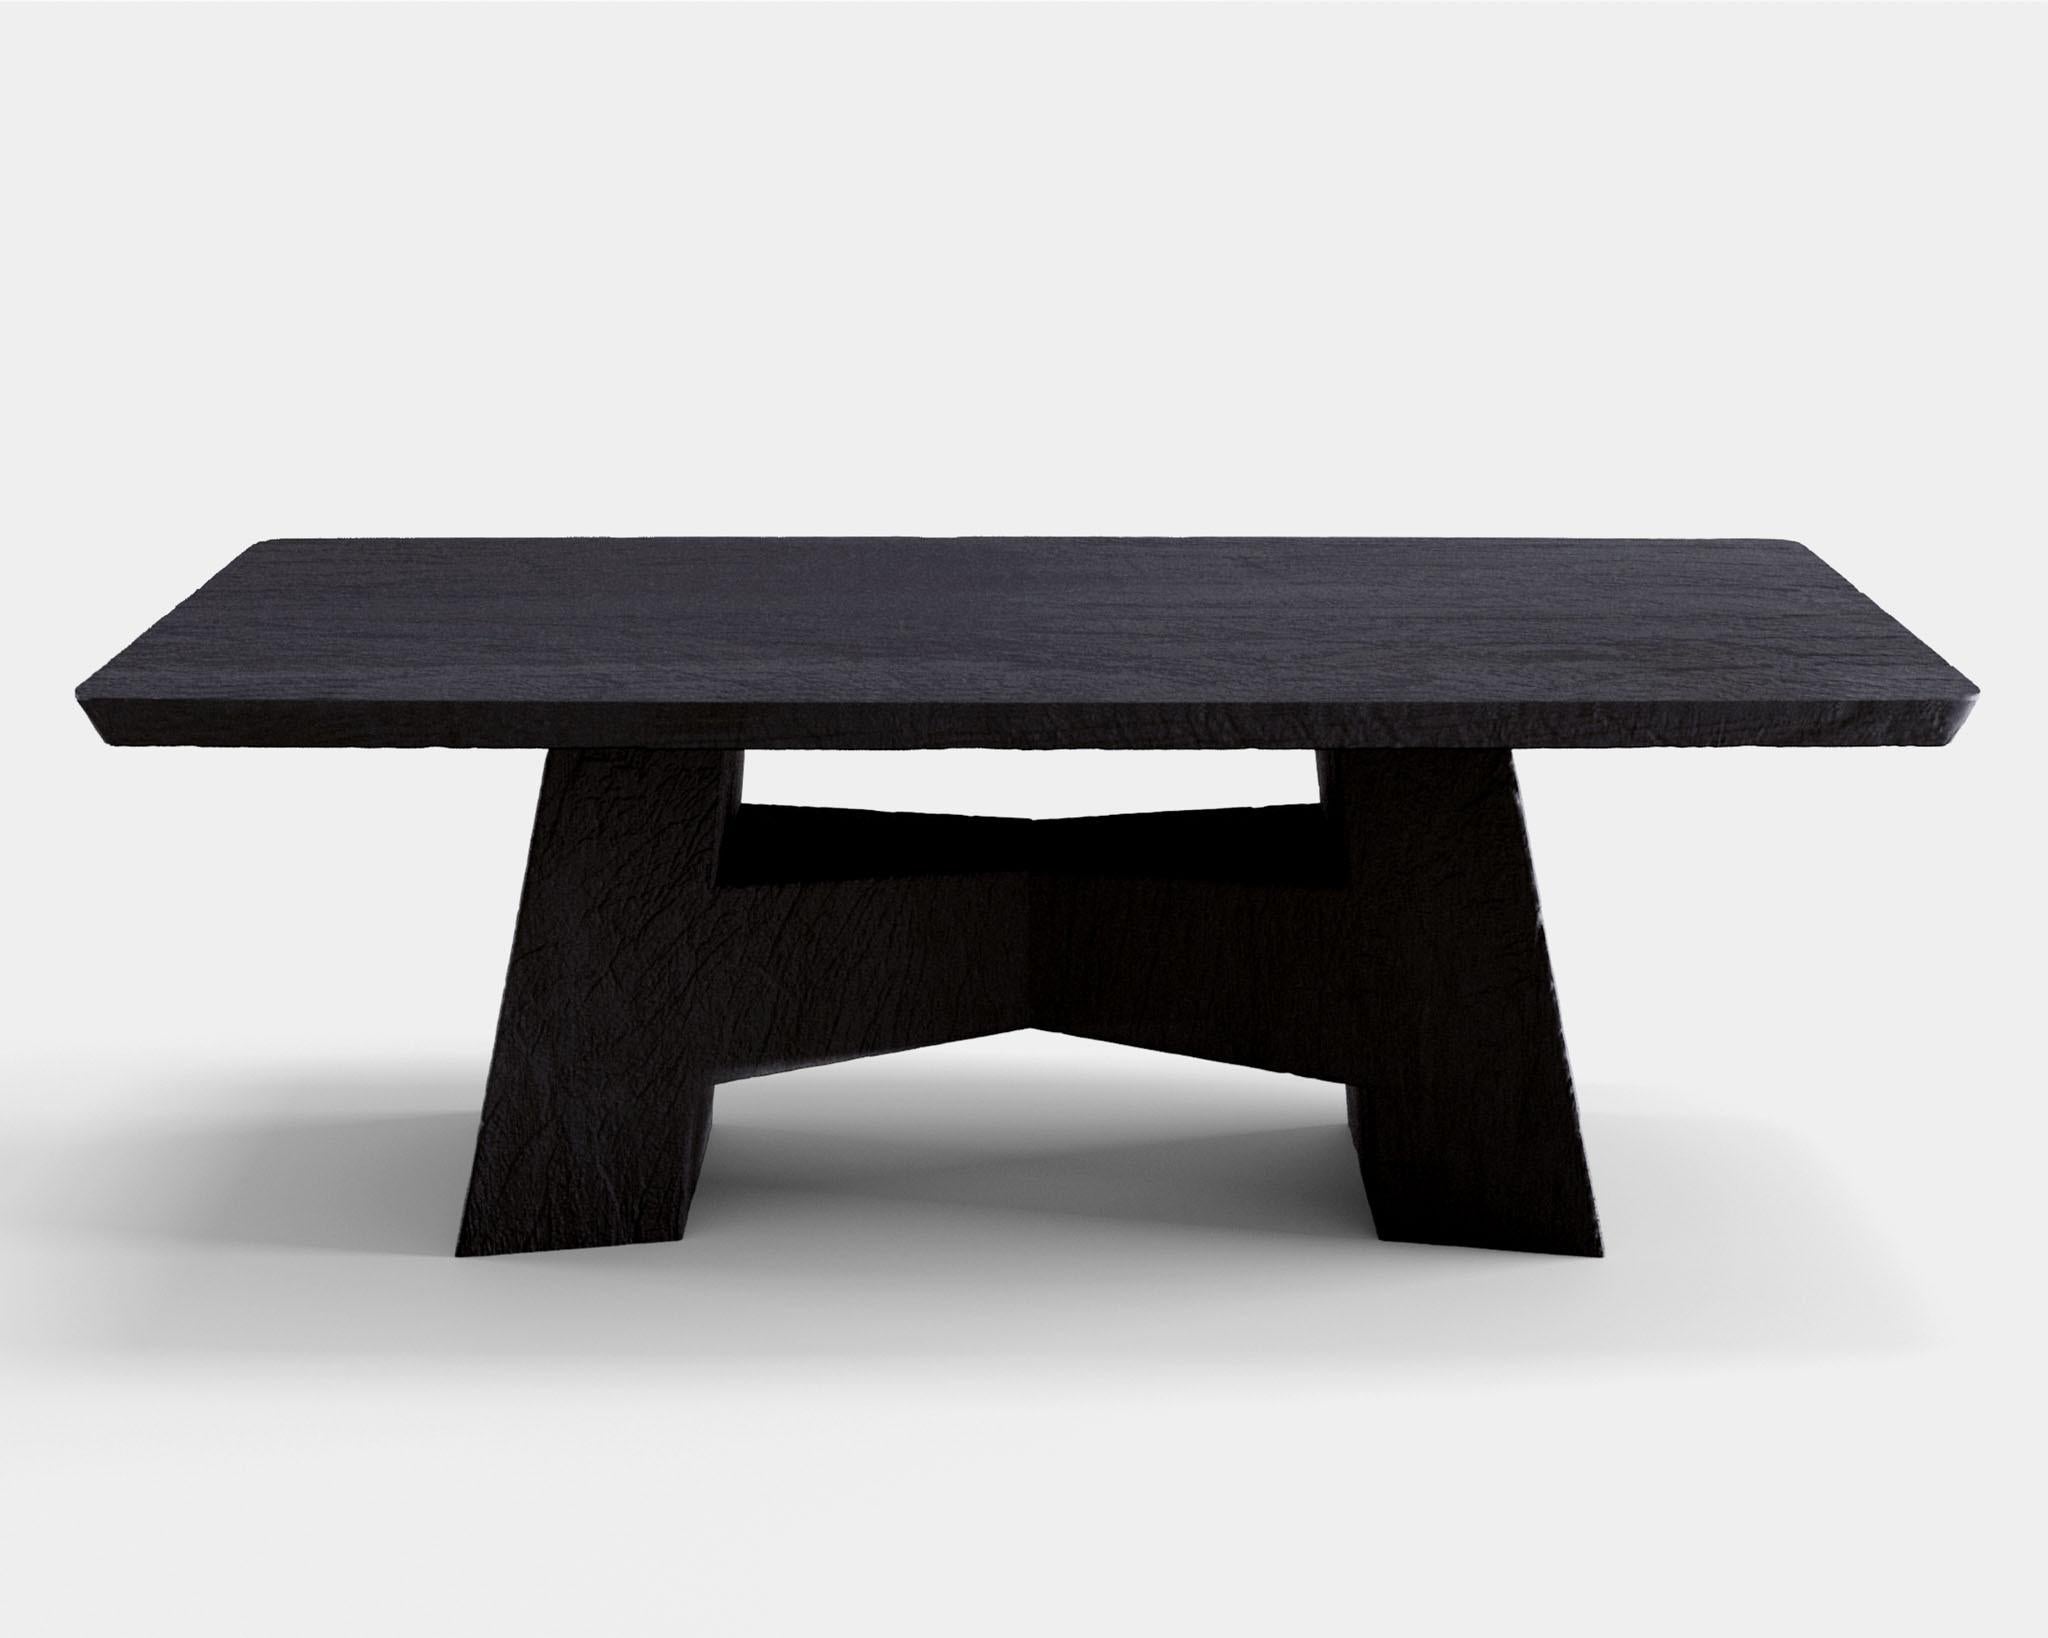 Customizable center table / dining table Mogwai by Camilo Andres Rodriguez Marquez (aka CarmWorks)

Solid oak or cedar / Burnt wood or natural 
Standard size: H 73 x 270 x 120 cm (customizable) 

Each piece is made to order and hand crafted by the